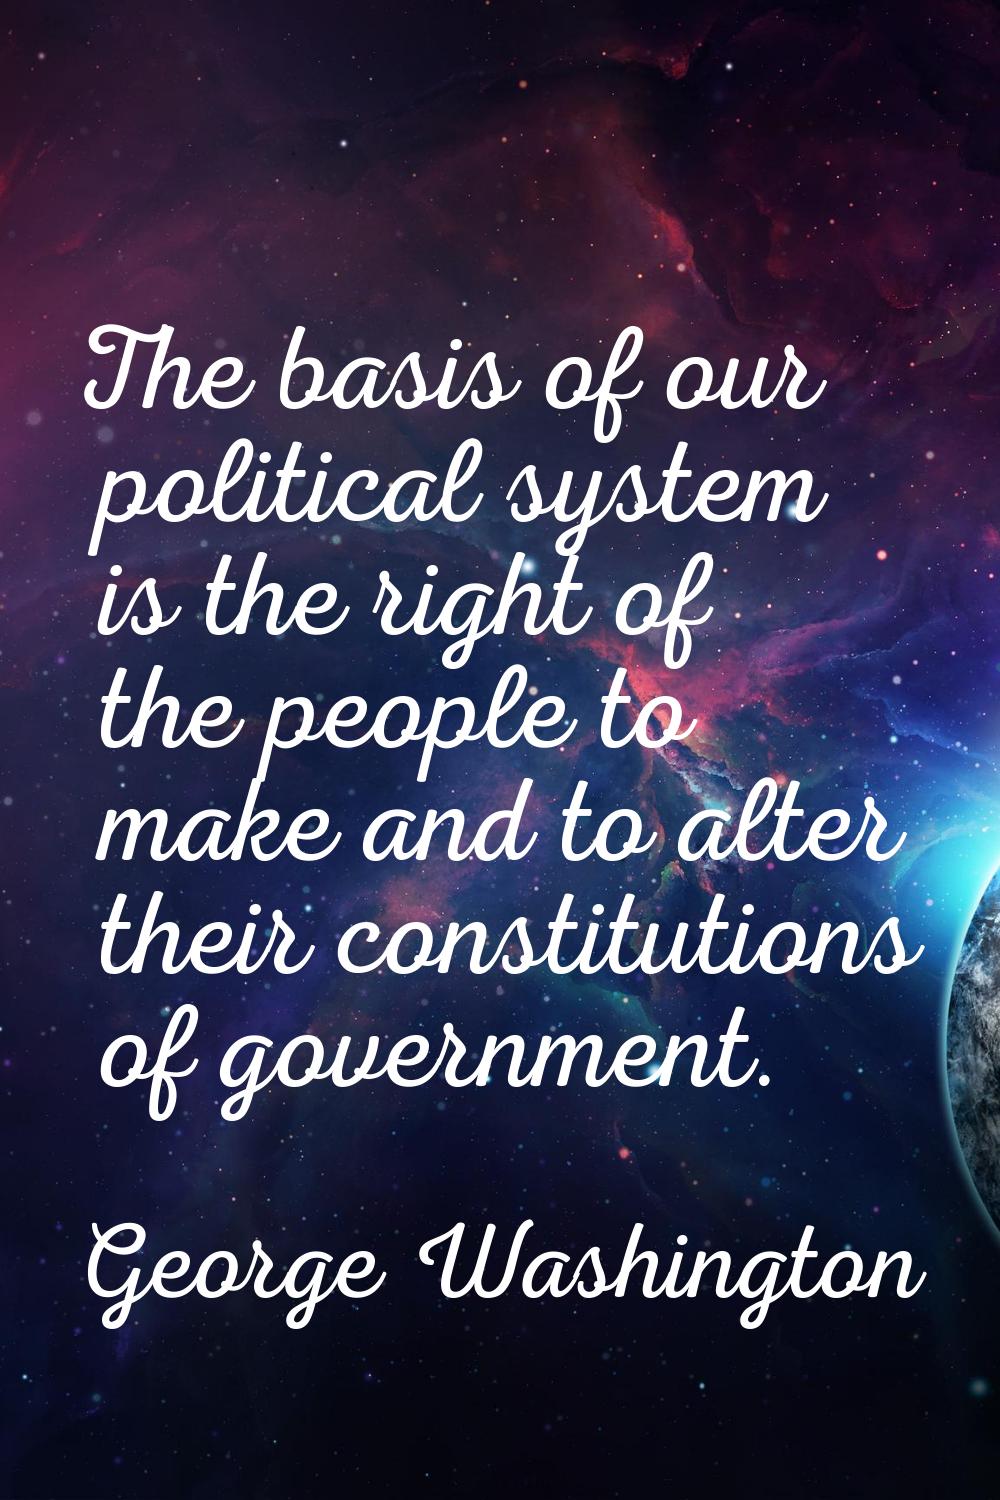 The basis of our political system is the right of the people to make and to alter their constitutio